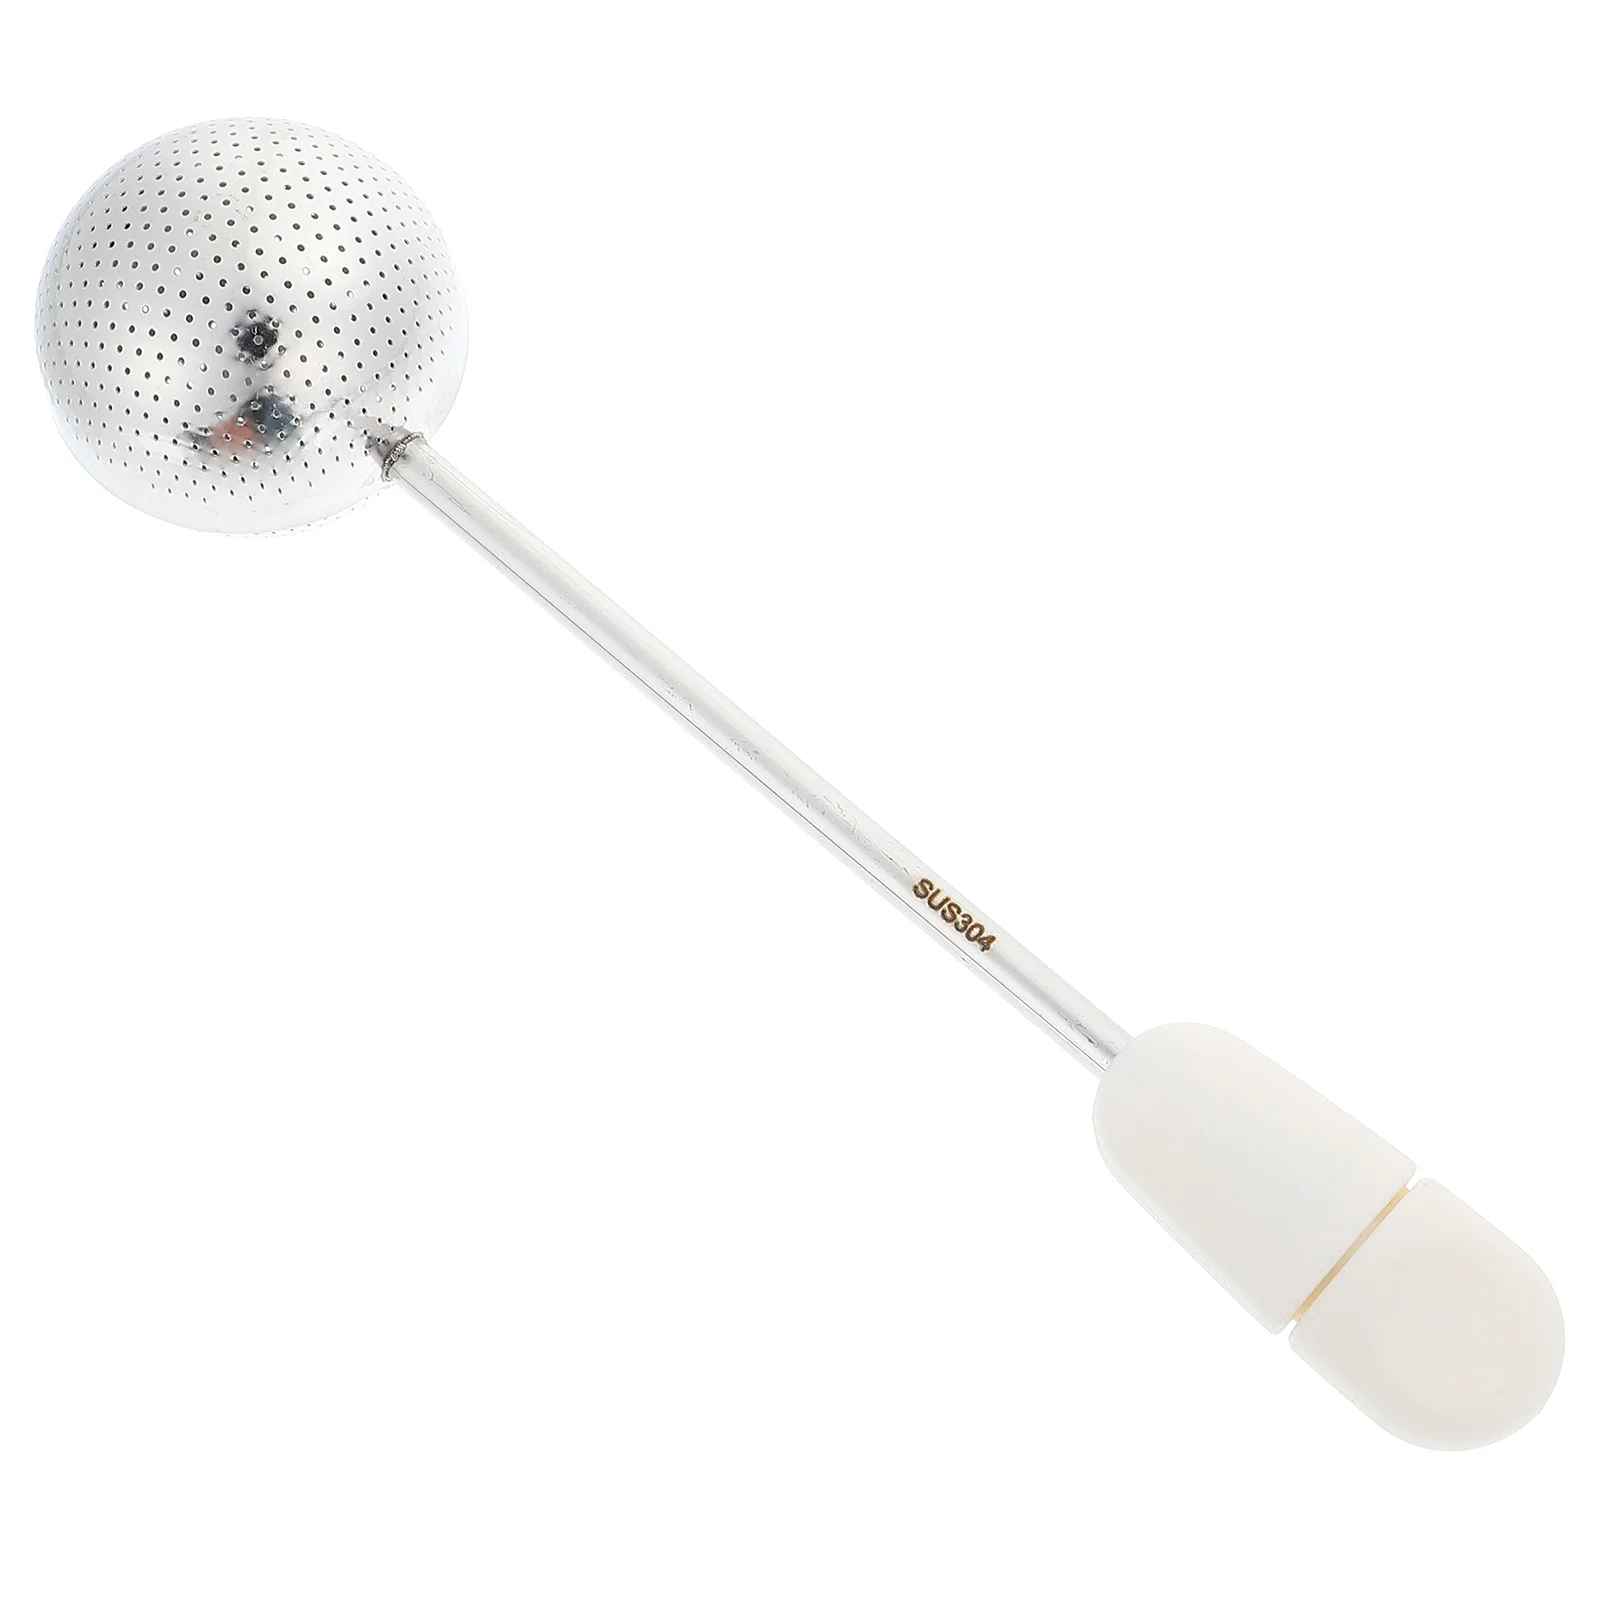 

Tea Loose Infuser Strainerball Steel Stainless Leaf Filter Strainers Infusers Diffuser Flour Steeper Sifterand Mesh Handle Sugar